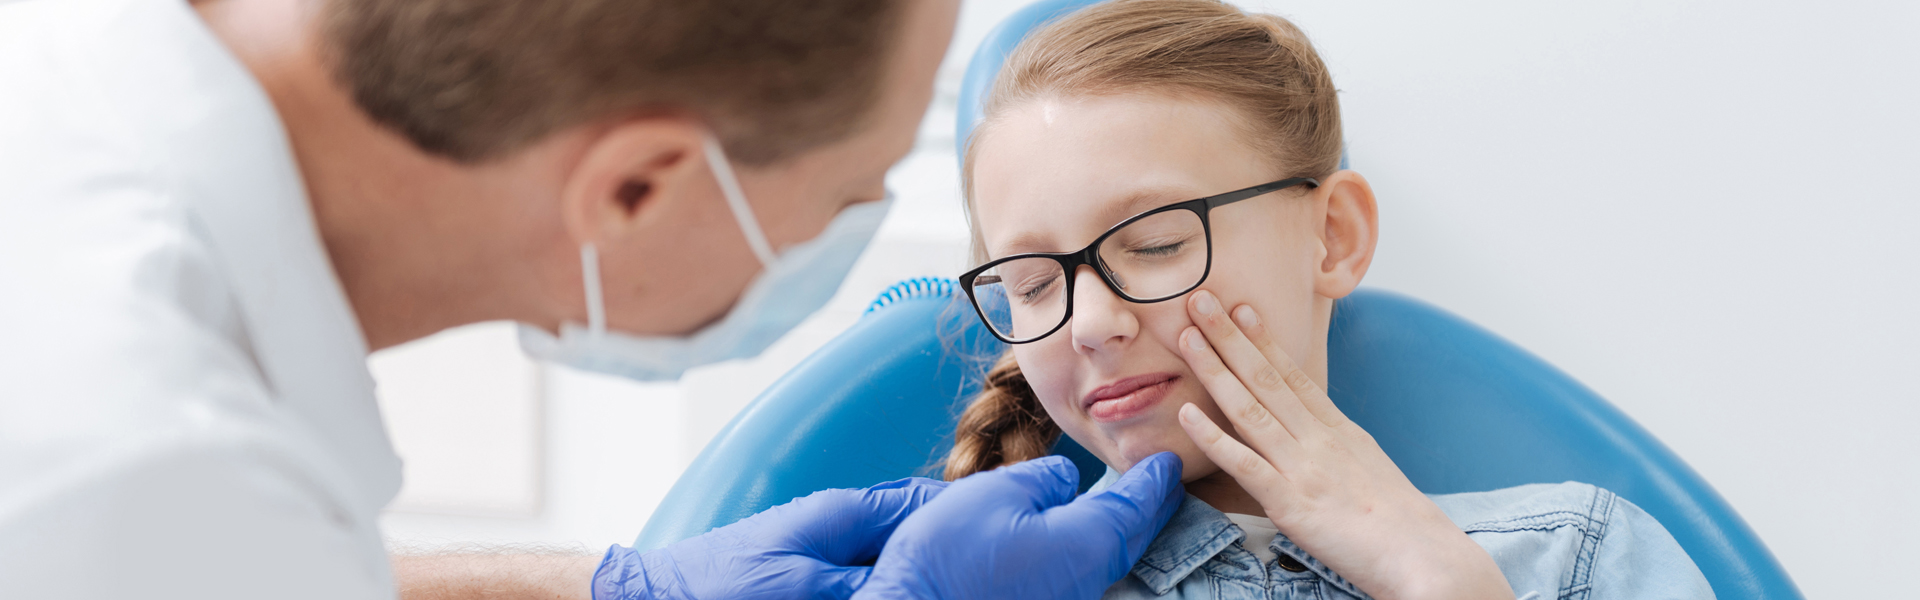 How to Deal with a Dental Emergency Quickly?